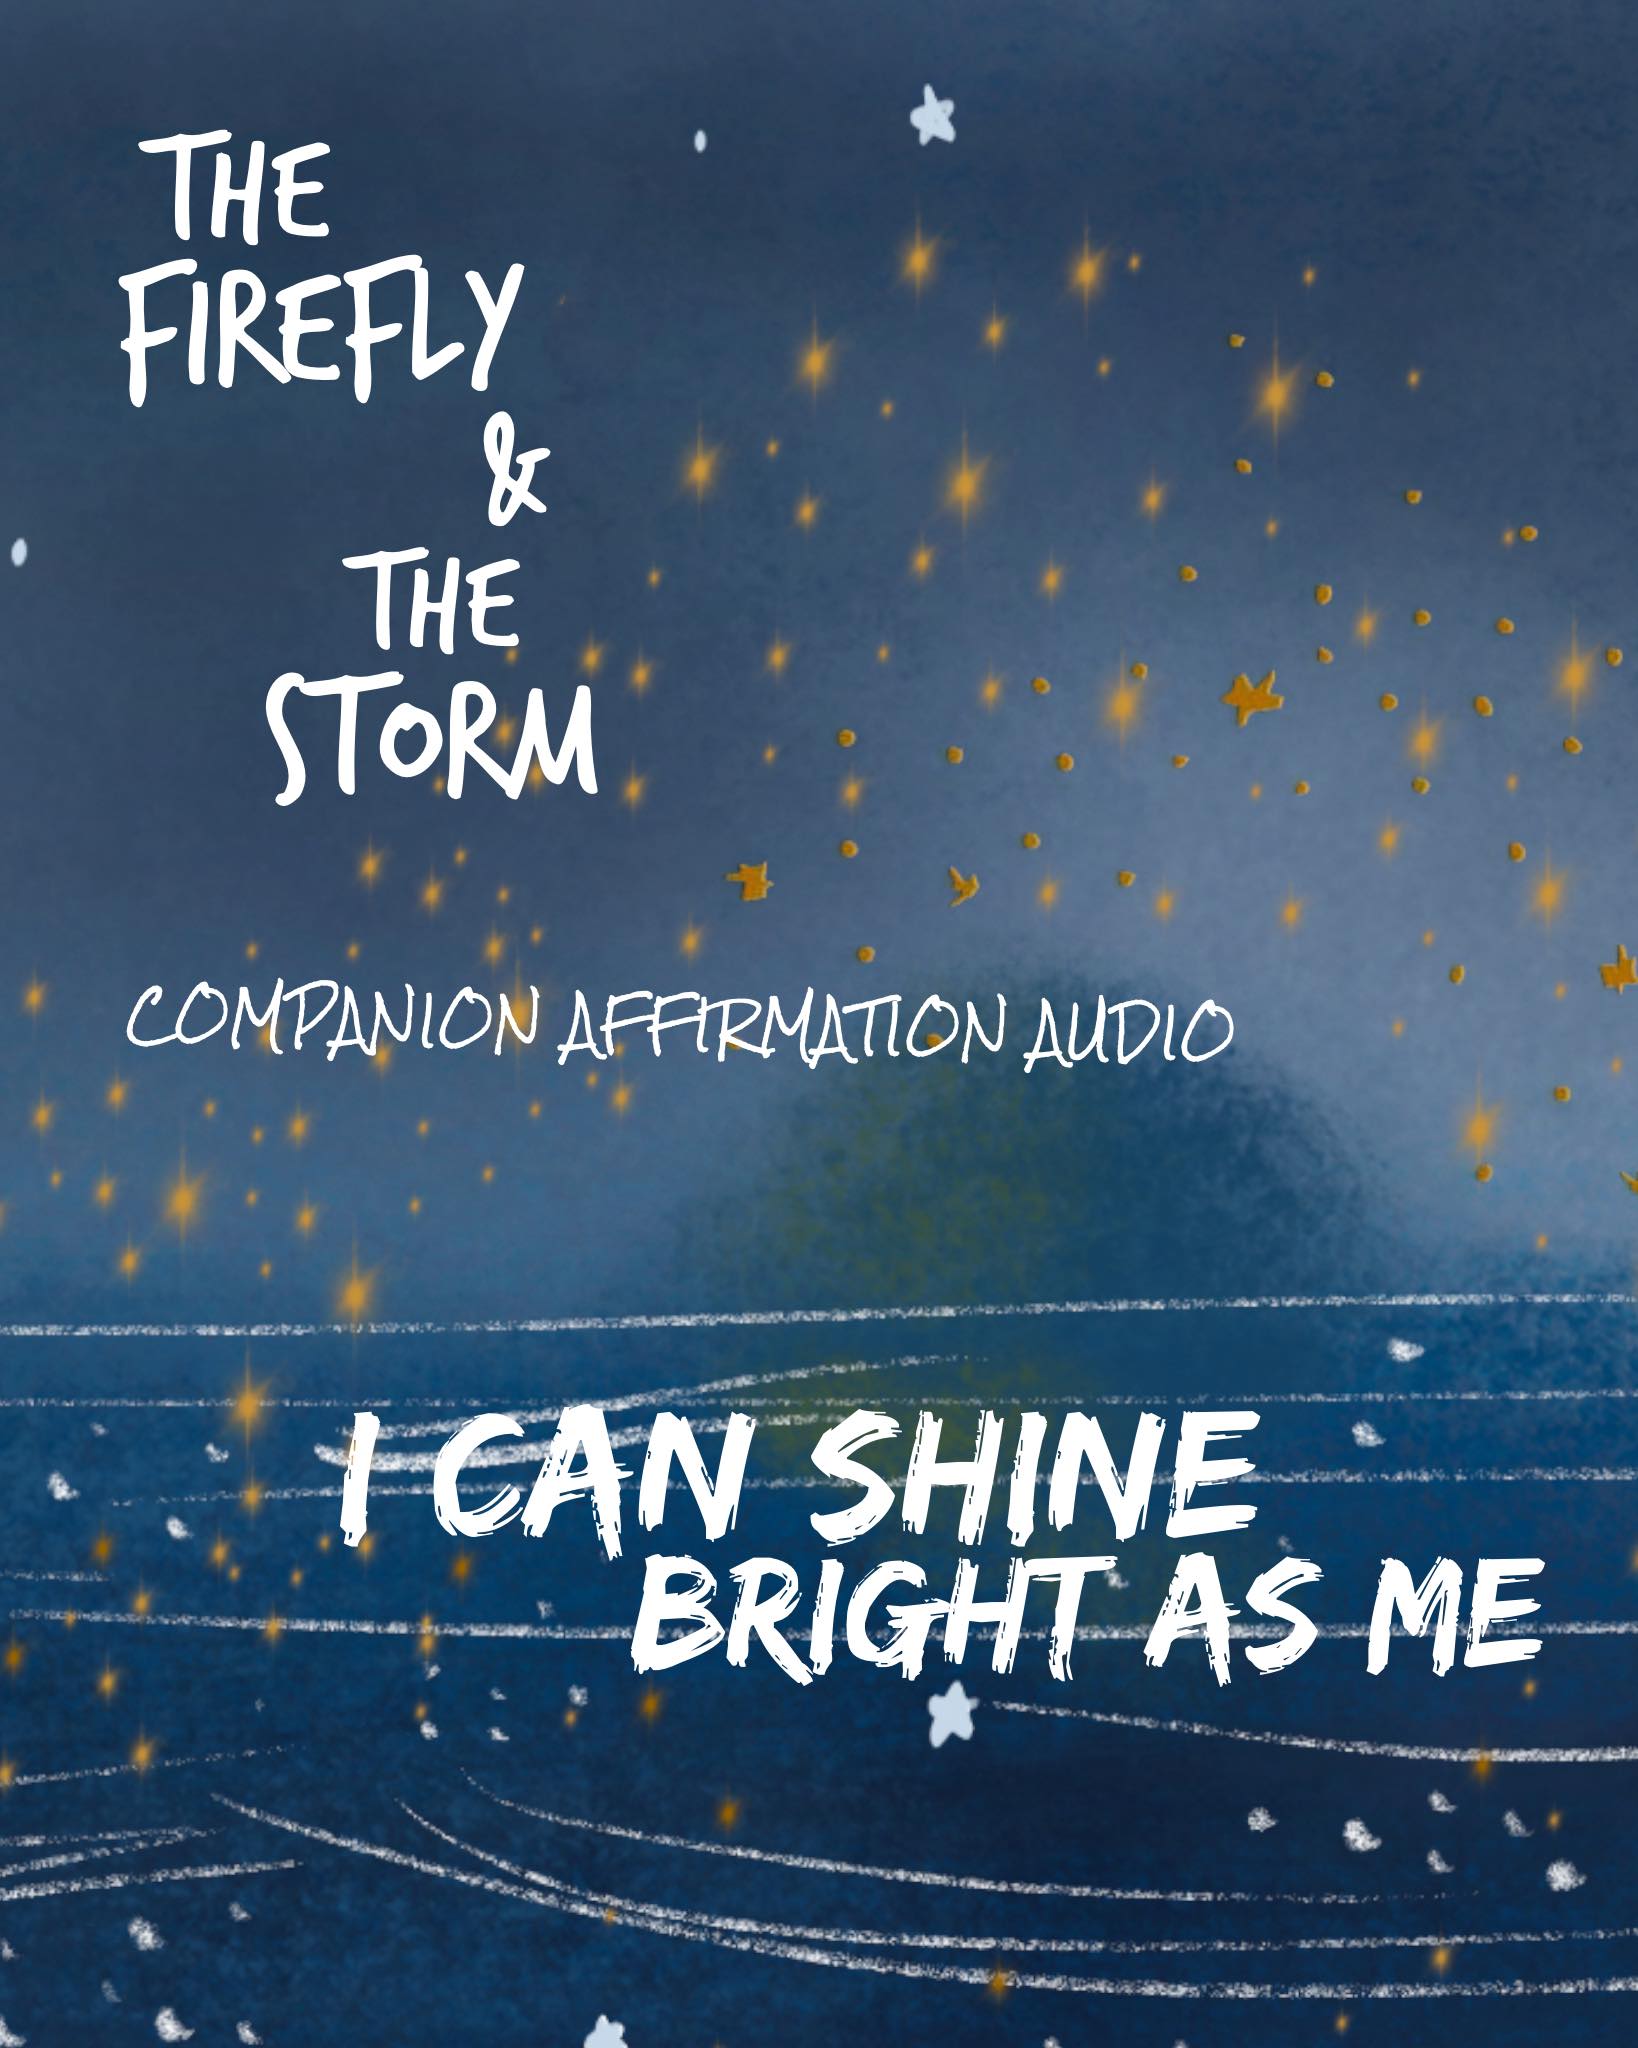 The Firefly and storm affirmation audio cover pic